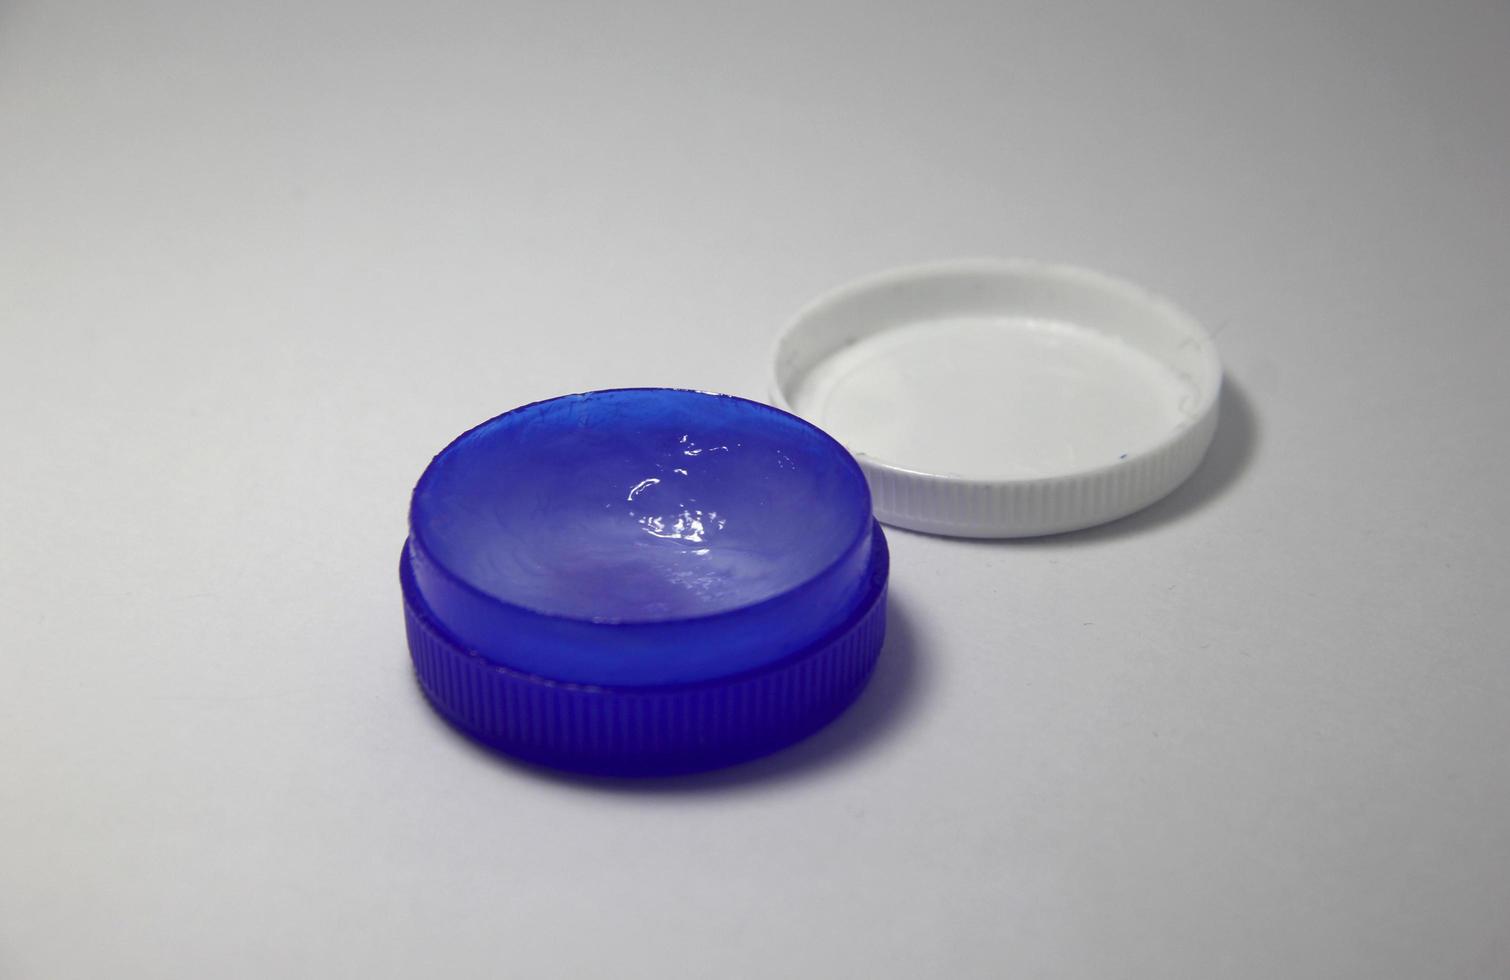 Small opened ointment blue container on simple white background. Can be used for beauty or medical purpose. photo